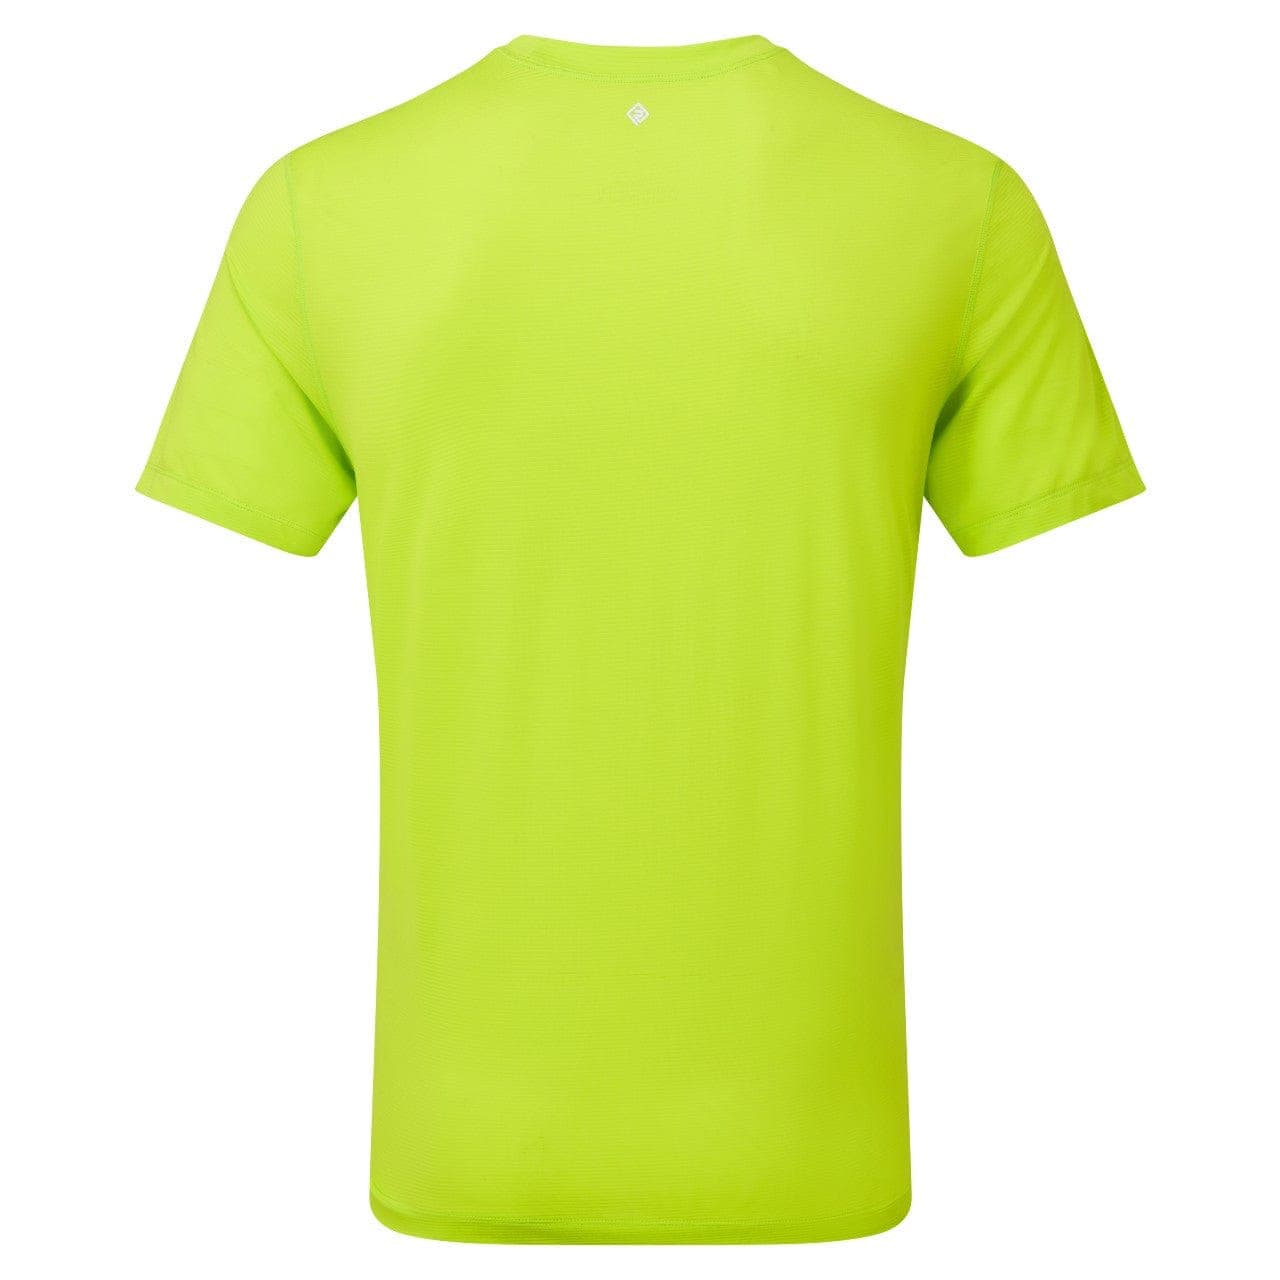 Ronhill Tech S/S Tee  (Mens) - AcidLime/BrightWhite